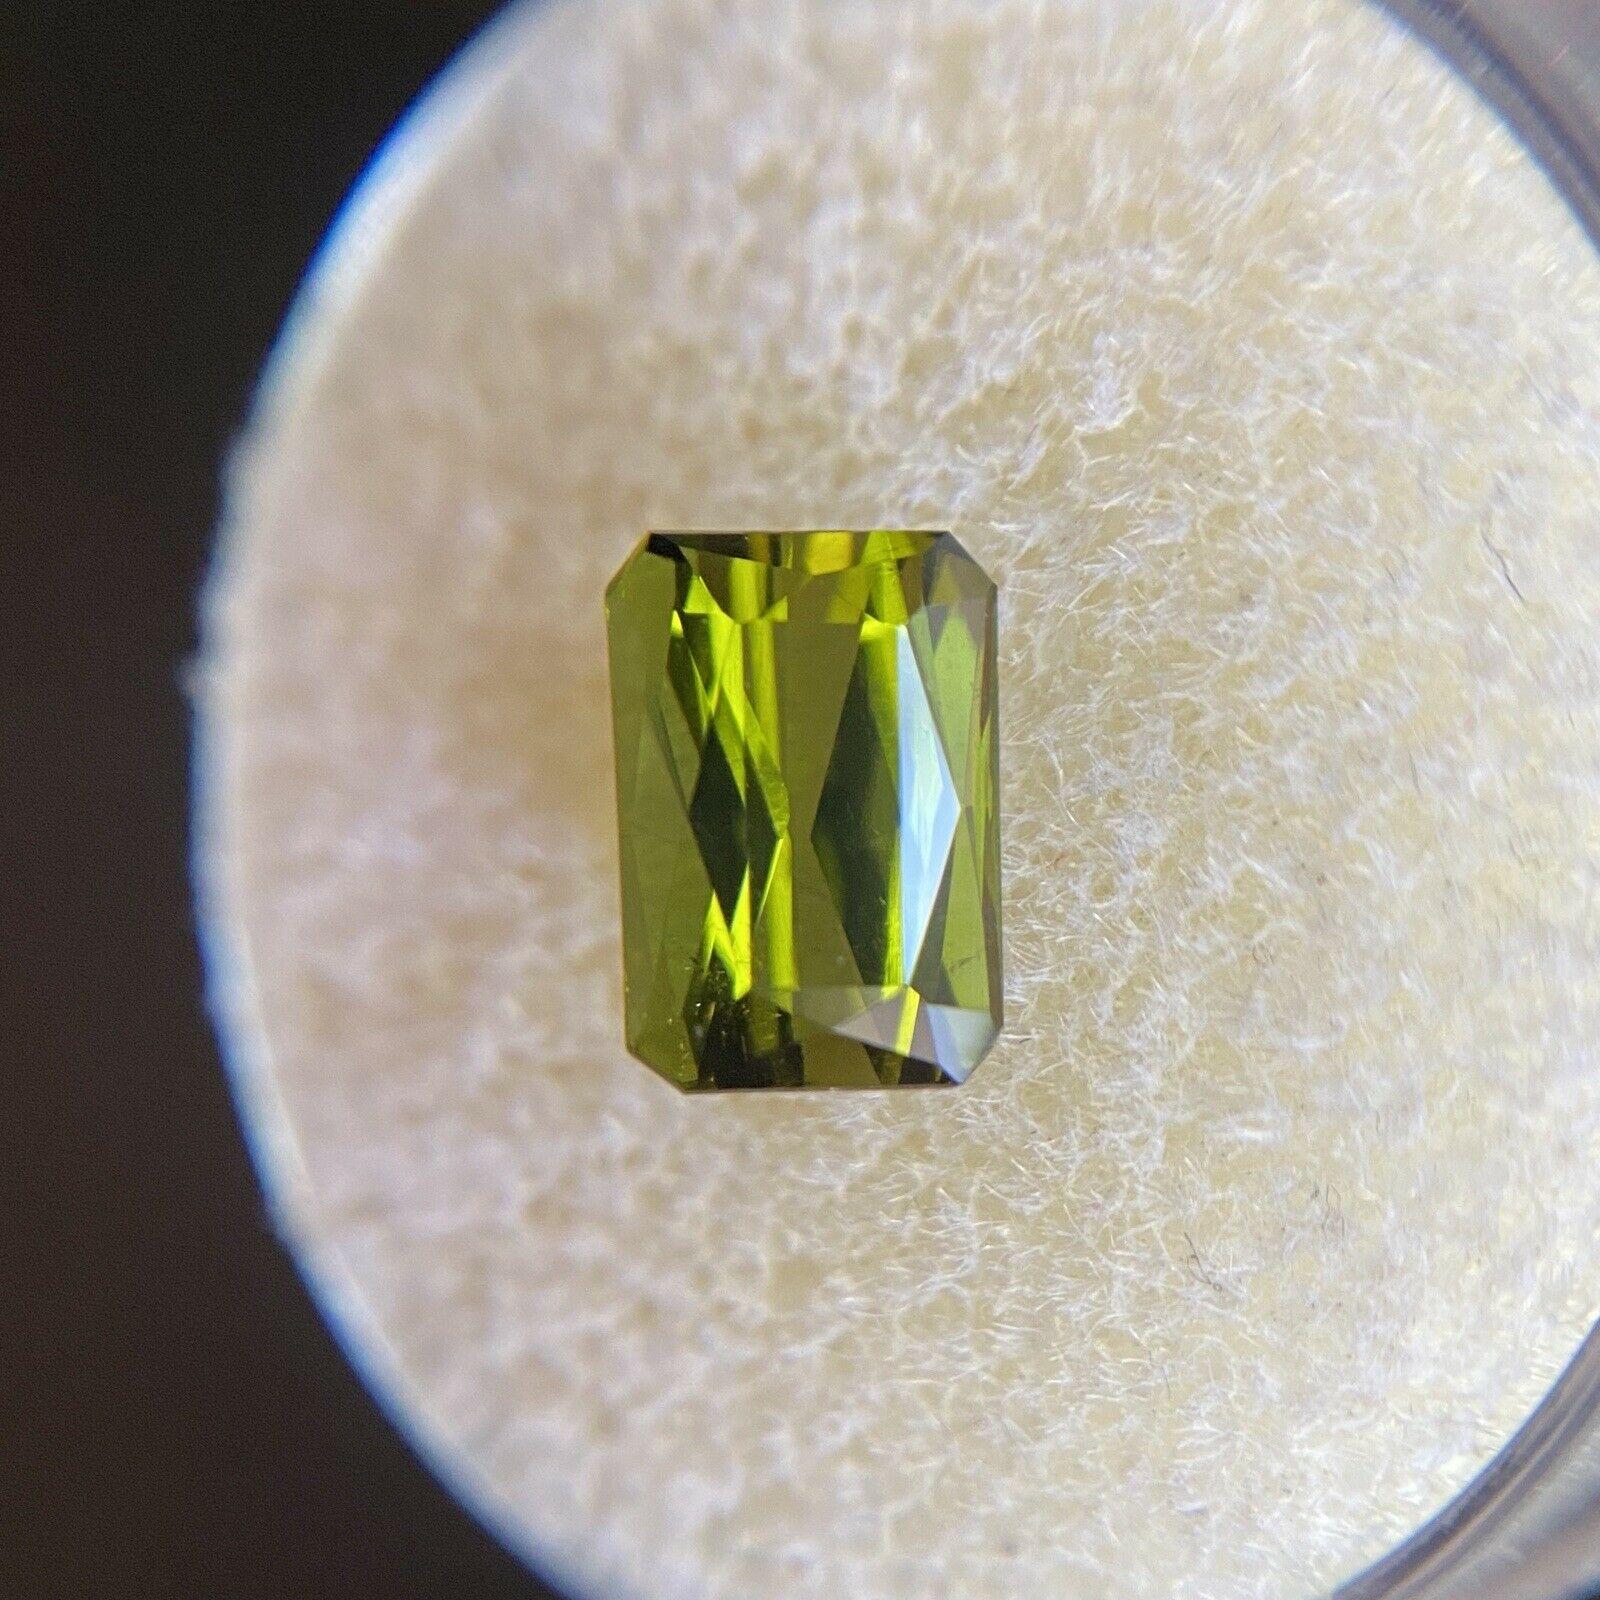 Vivid Green Tourmaline 1.87ct Fancy Scissor Emerald Octagon Cut Gem 8.3 x 5.7mm

Natural Vivid Green Tourmaline Gemstone. 
1.87 Carat with a beautiful vivid green colour and very good clarity. Clean stone with only some small natural inclusions